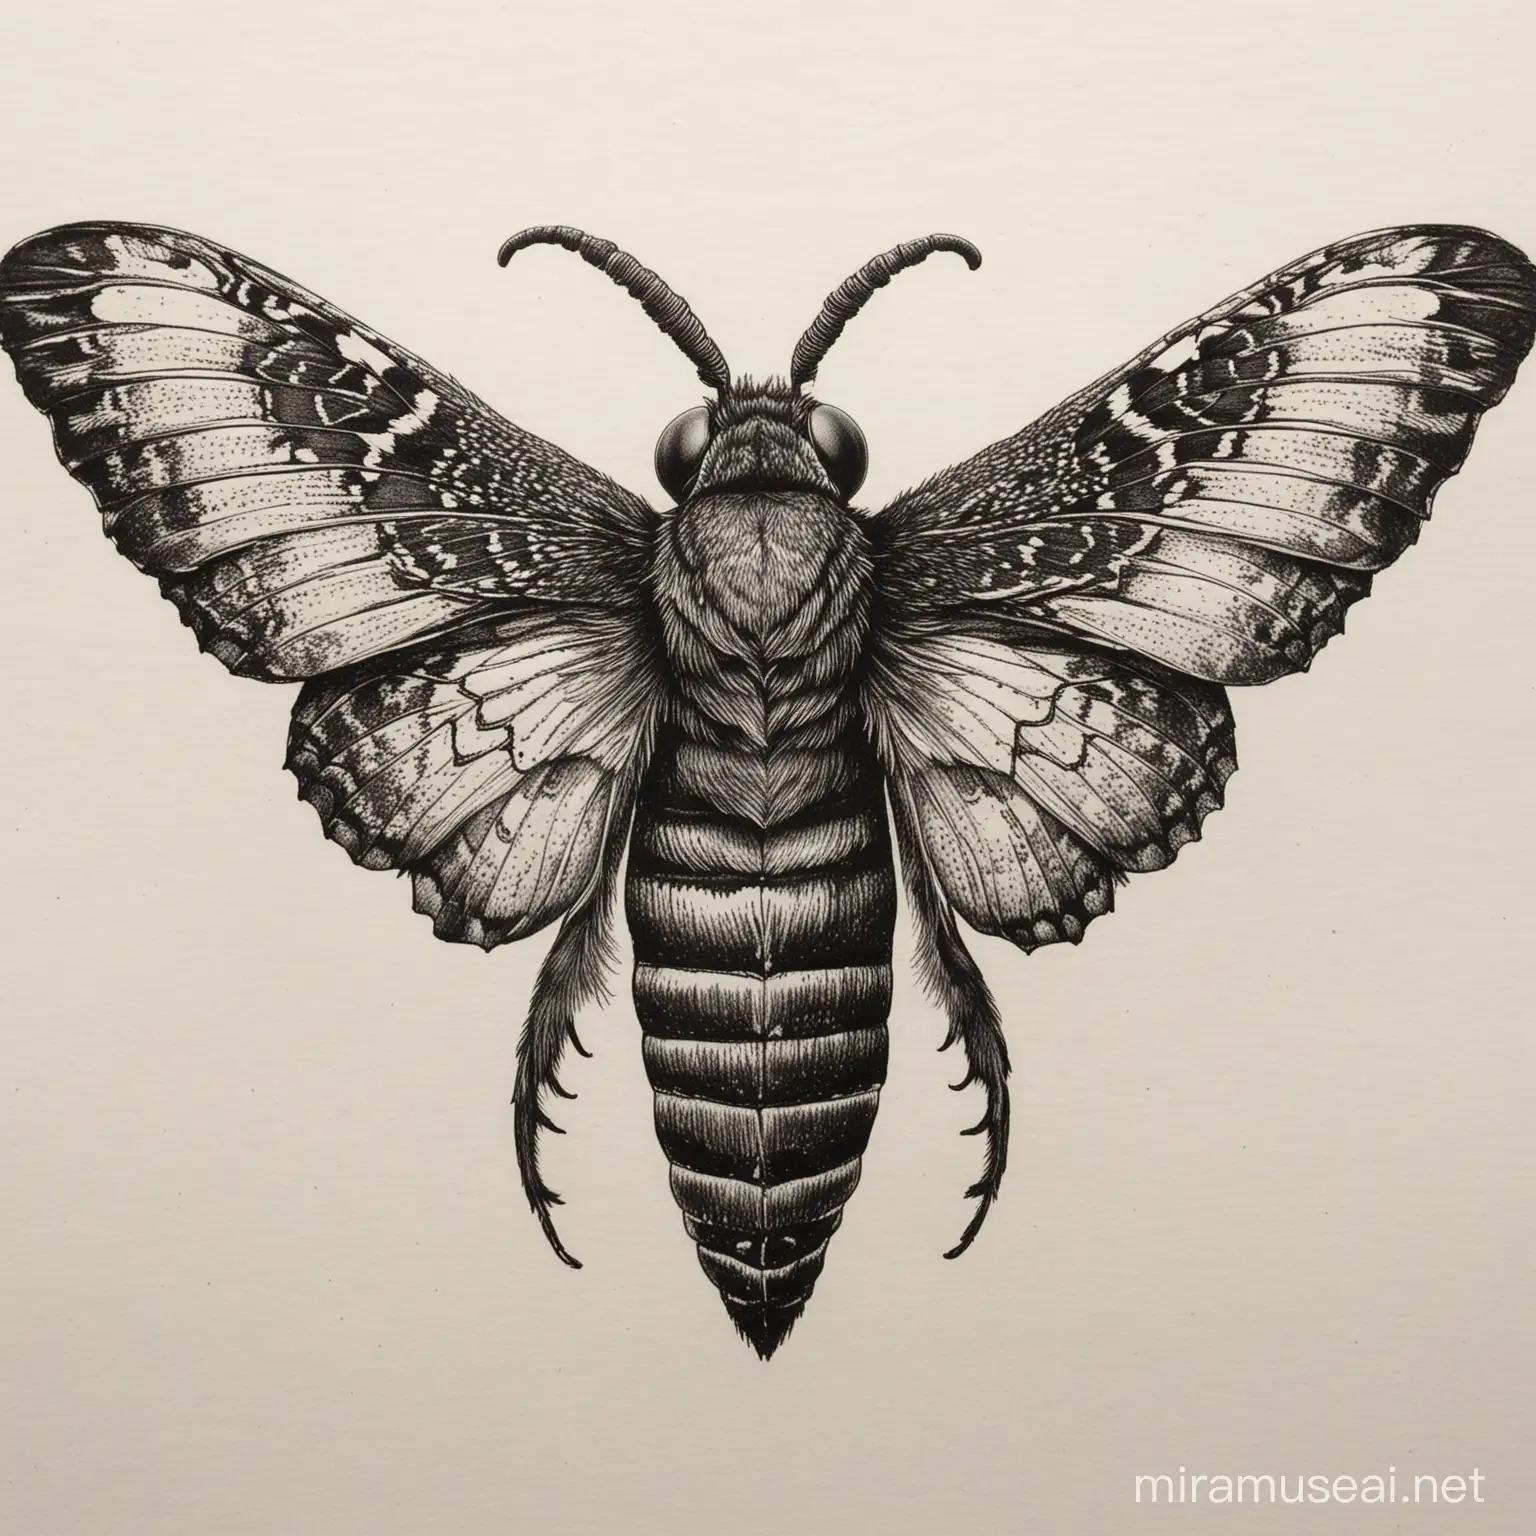 a linocut print of a death's-head hawkmoth seen from above. The moth has human skull-shaped pattern of markings on the thorax. The print is on heavily textured white paper. Negative space around the moth.